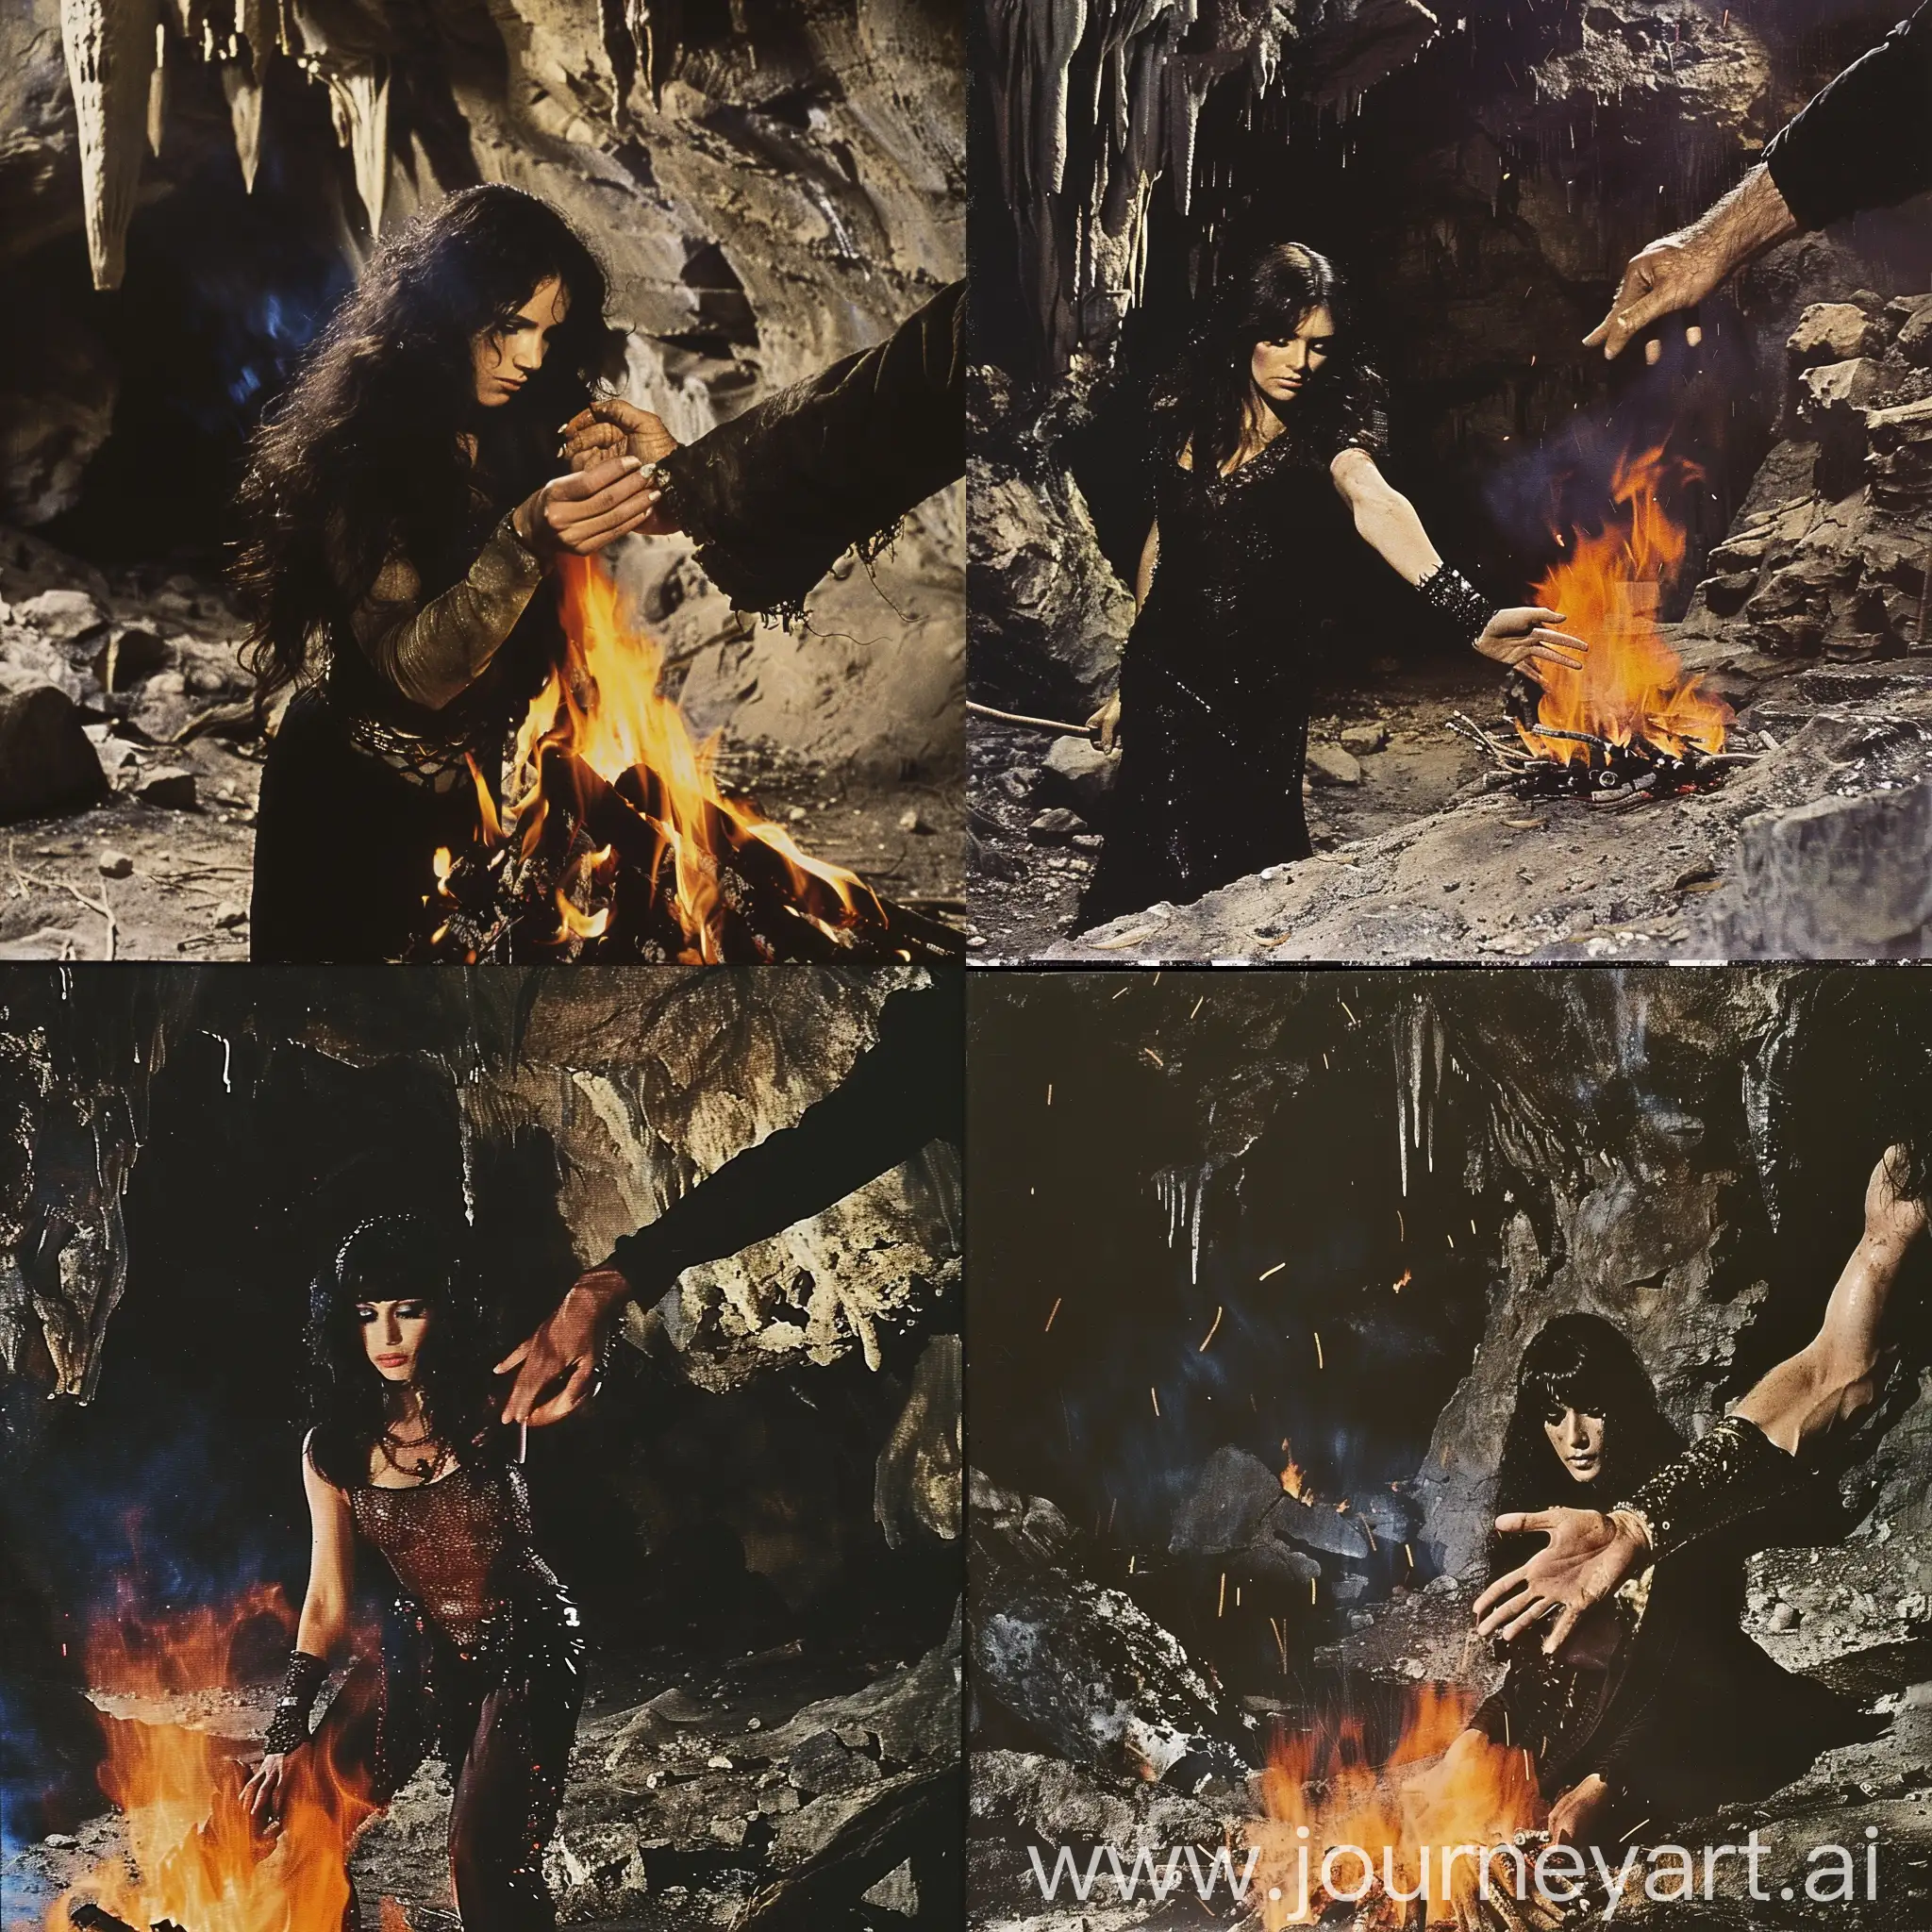 dvd screenengrabs character/Arx Fatalis, dark-haired woman on a funeral pyre in a cave, held by the hand of a man 1980 style